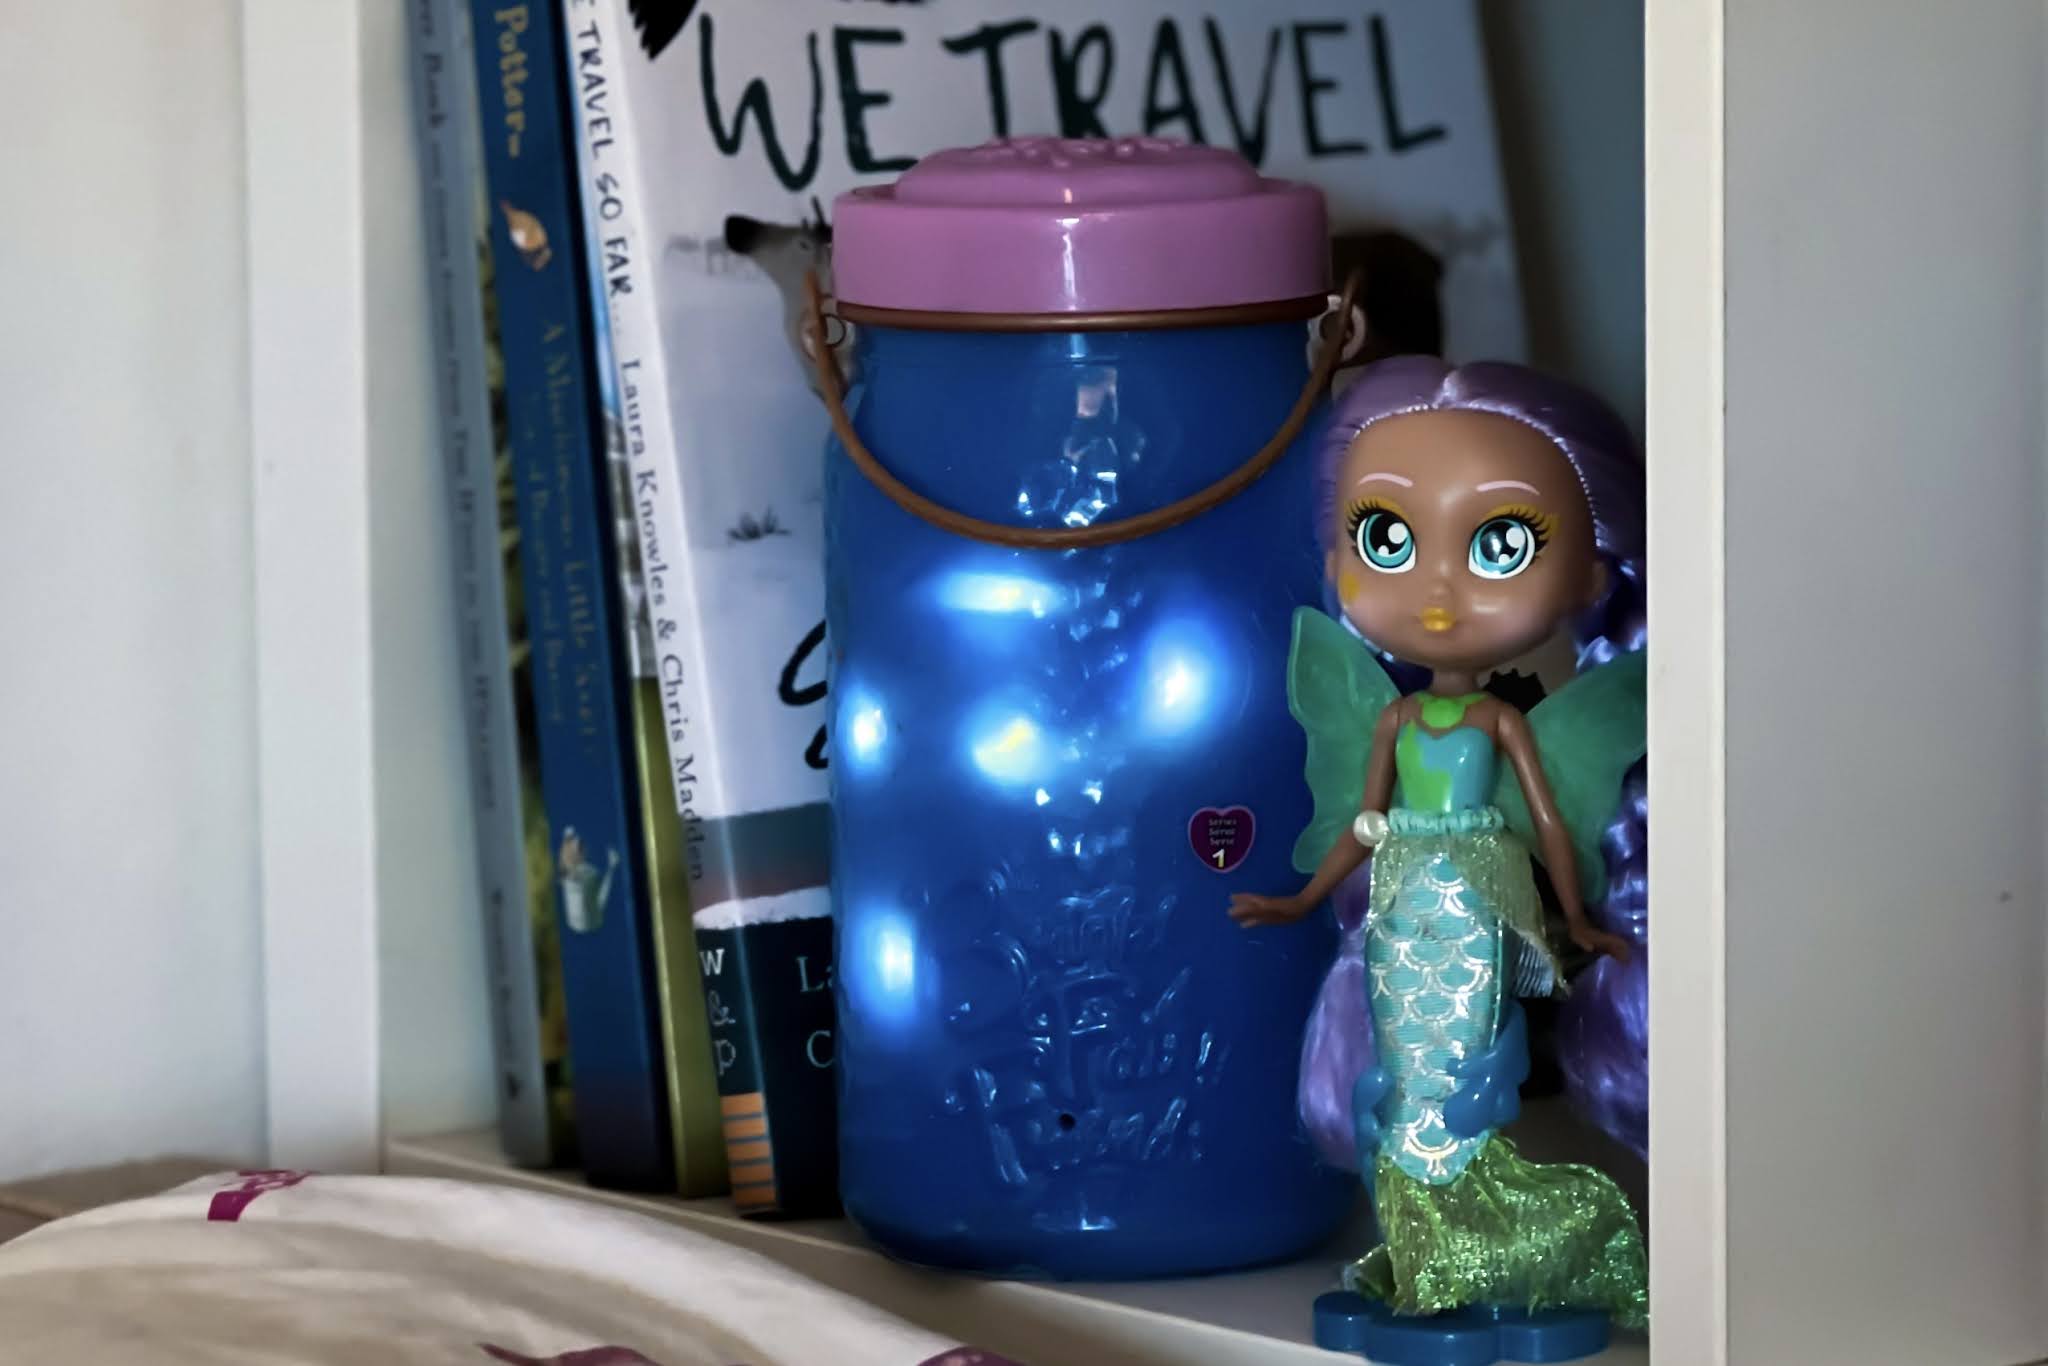 Bright Fairy Friends review showing the mermaid doll in stand and light up jar on a bookshelf